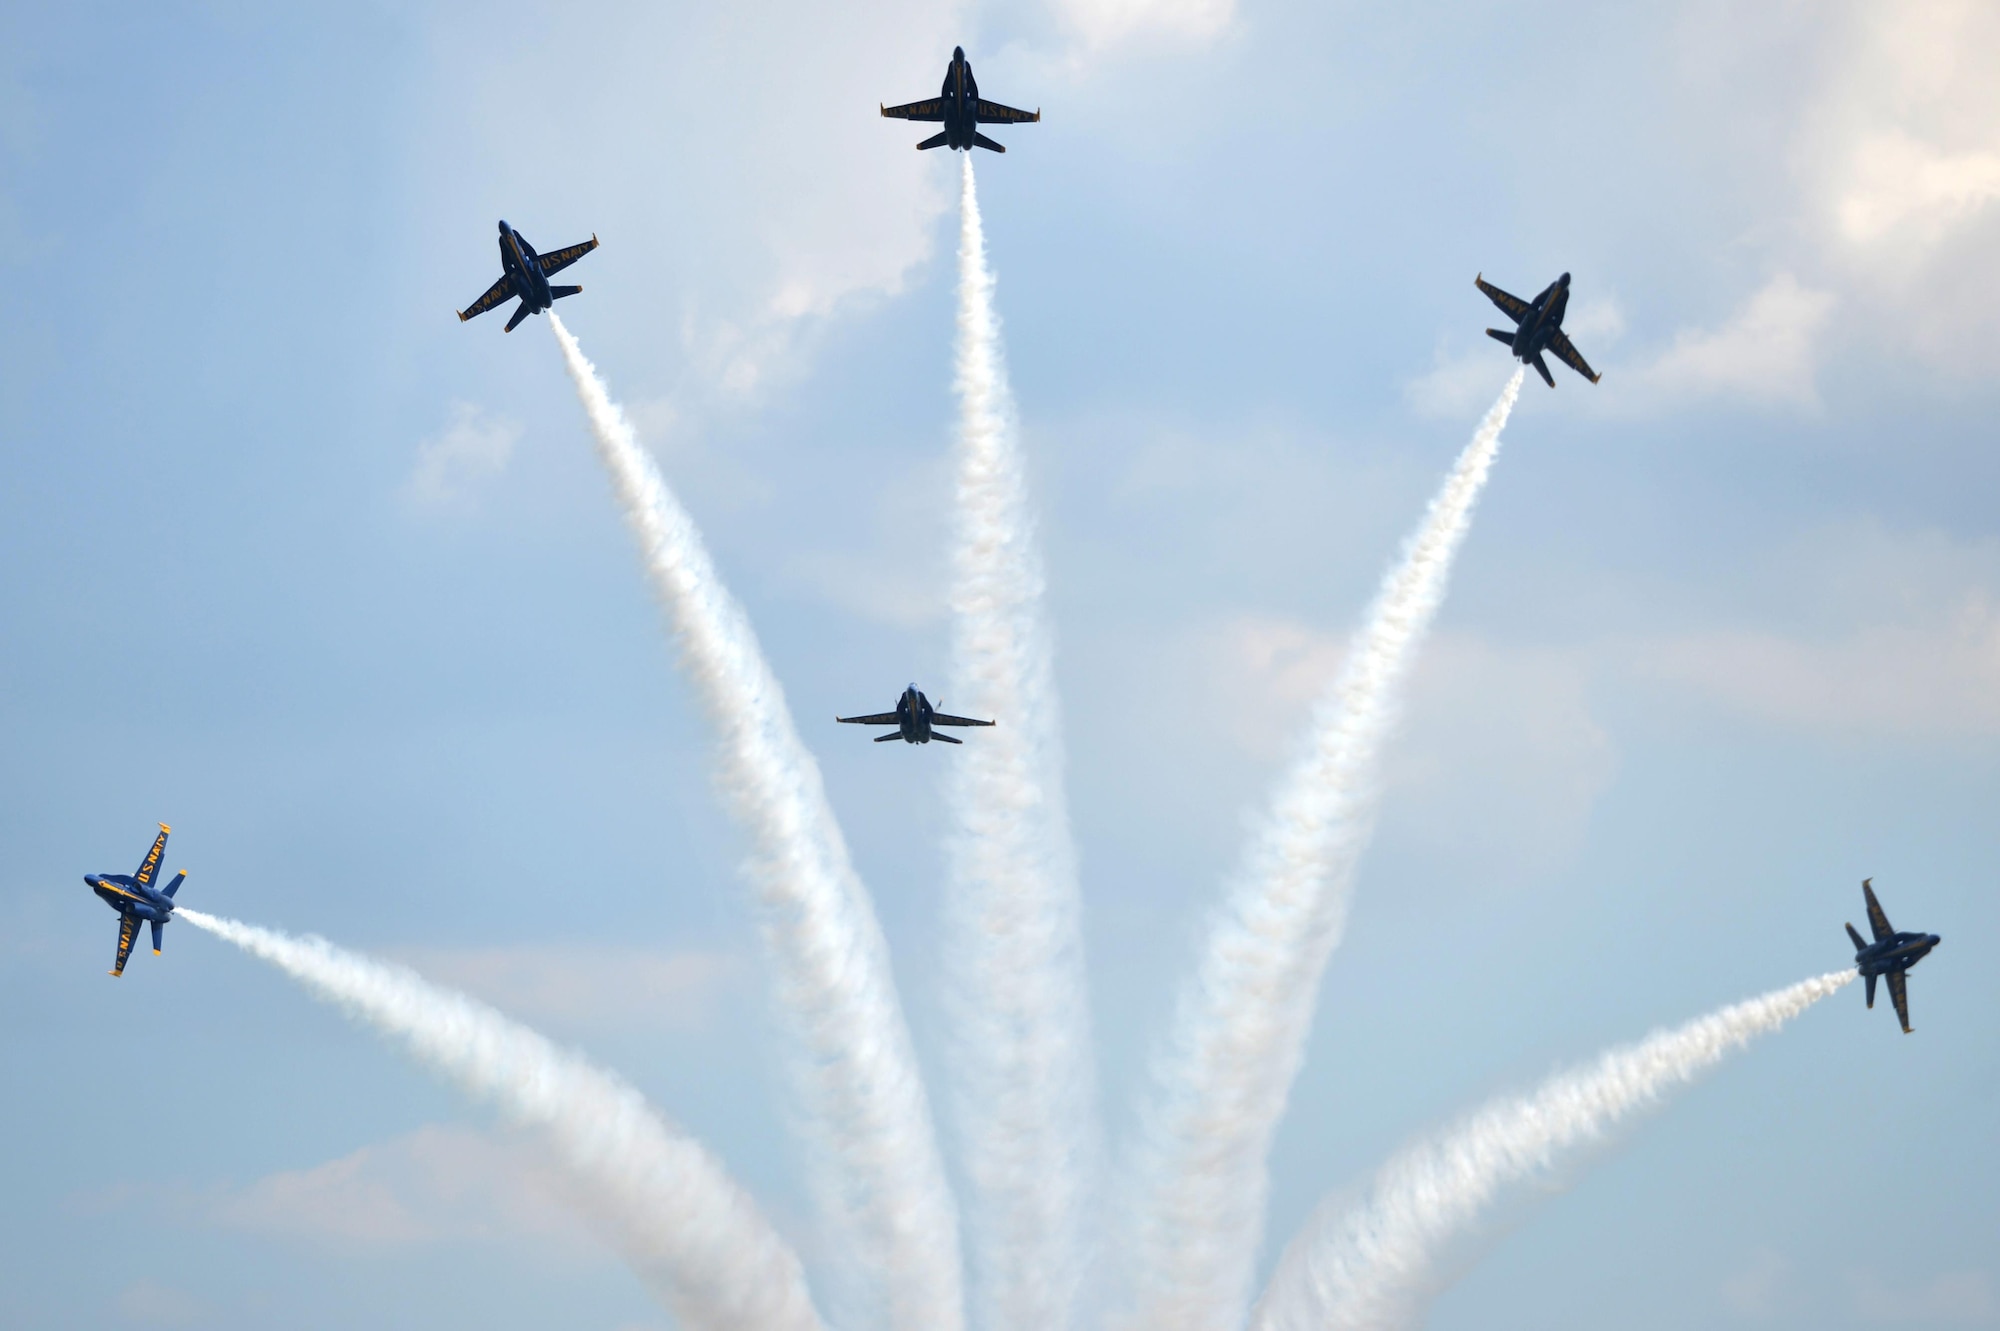 The U.S. Navy Blue Angels fly in formation during the Wings Over Wayne Air Show, May 20, 2017, at Seymour Johnson Air Force Base, North Carolina. Seymour Johnson AFB hosted the free, two-day air show as a way to thank the public and local community for their ongoing support of the base’s missions. (U.S. Air Force photo by Airman 1st Class Christopher Maldonado)